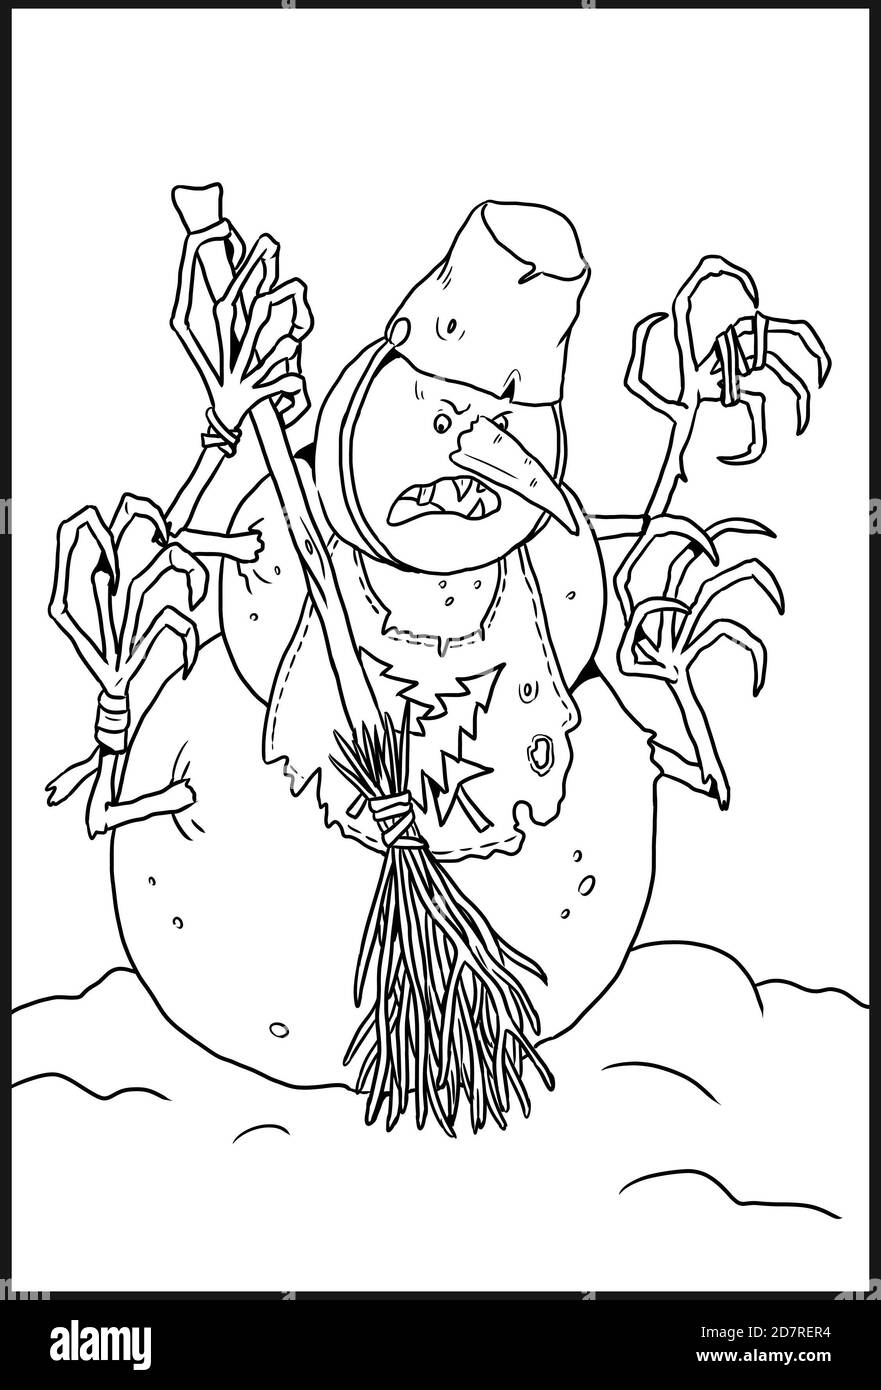 Angry snowman drawing.  Halloween monster coloring template. Stock Photo